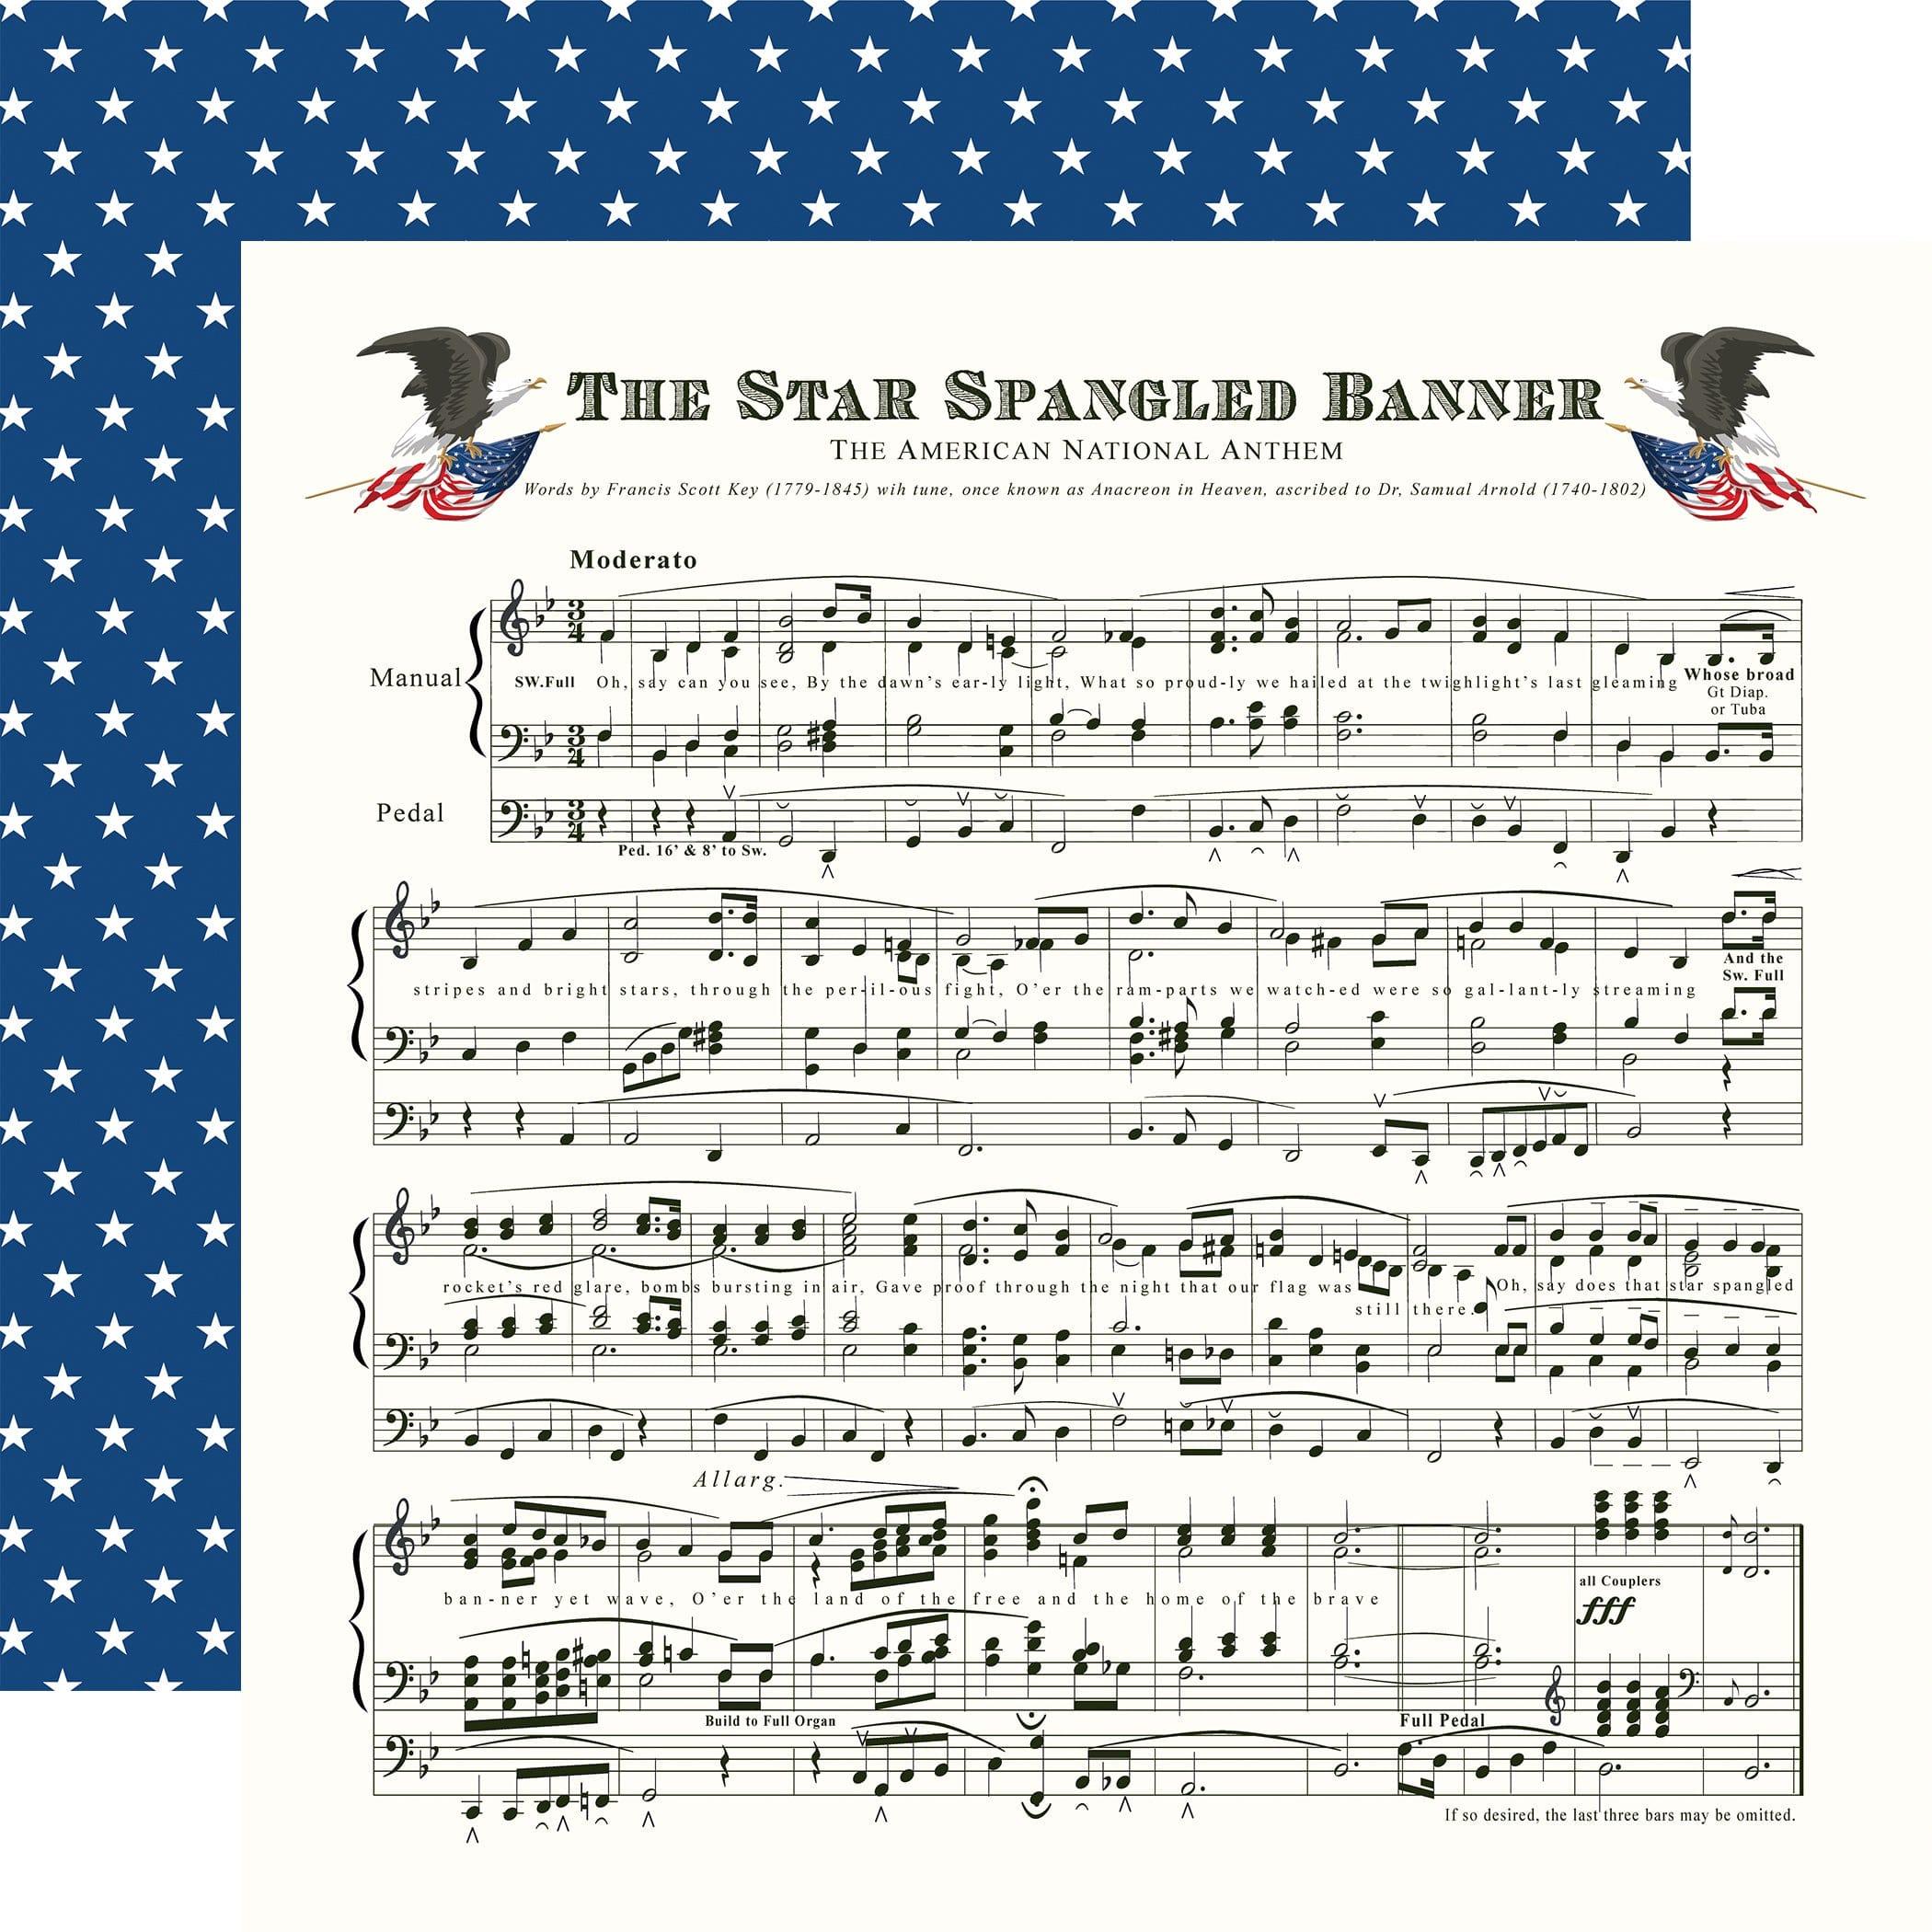 God Bless America Collection Star Spangled Banner 12 x 12 Double-Sided Scrapbook Paper by Carta Bella - Scrapbook Supply Companies